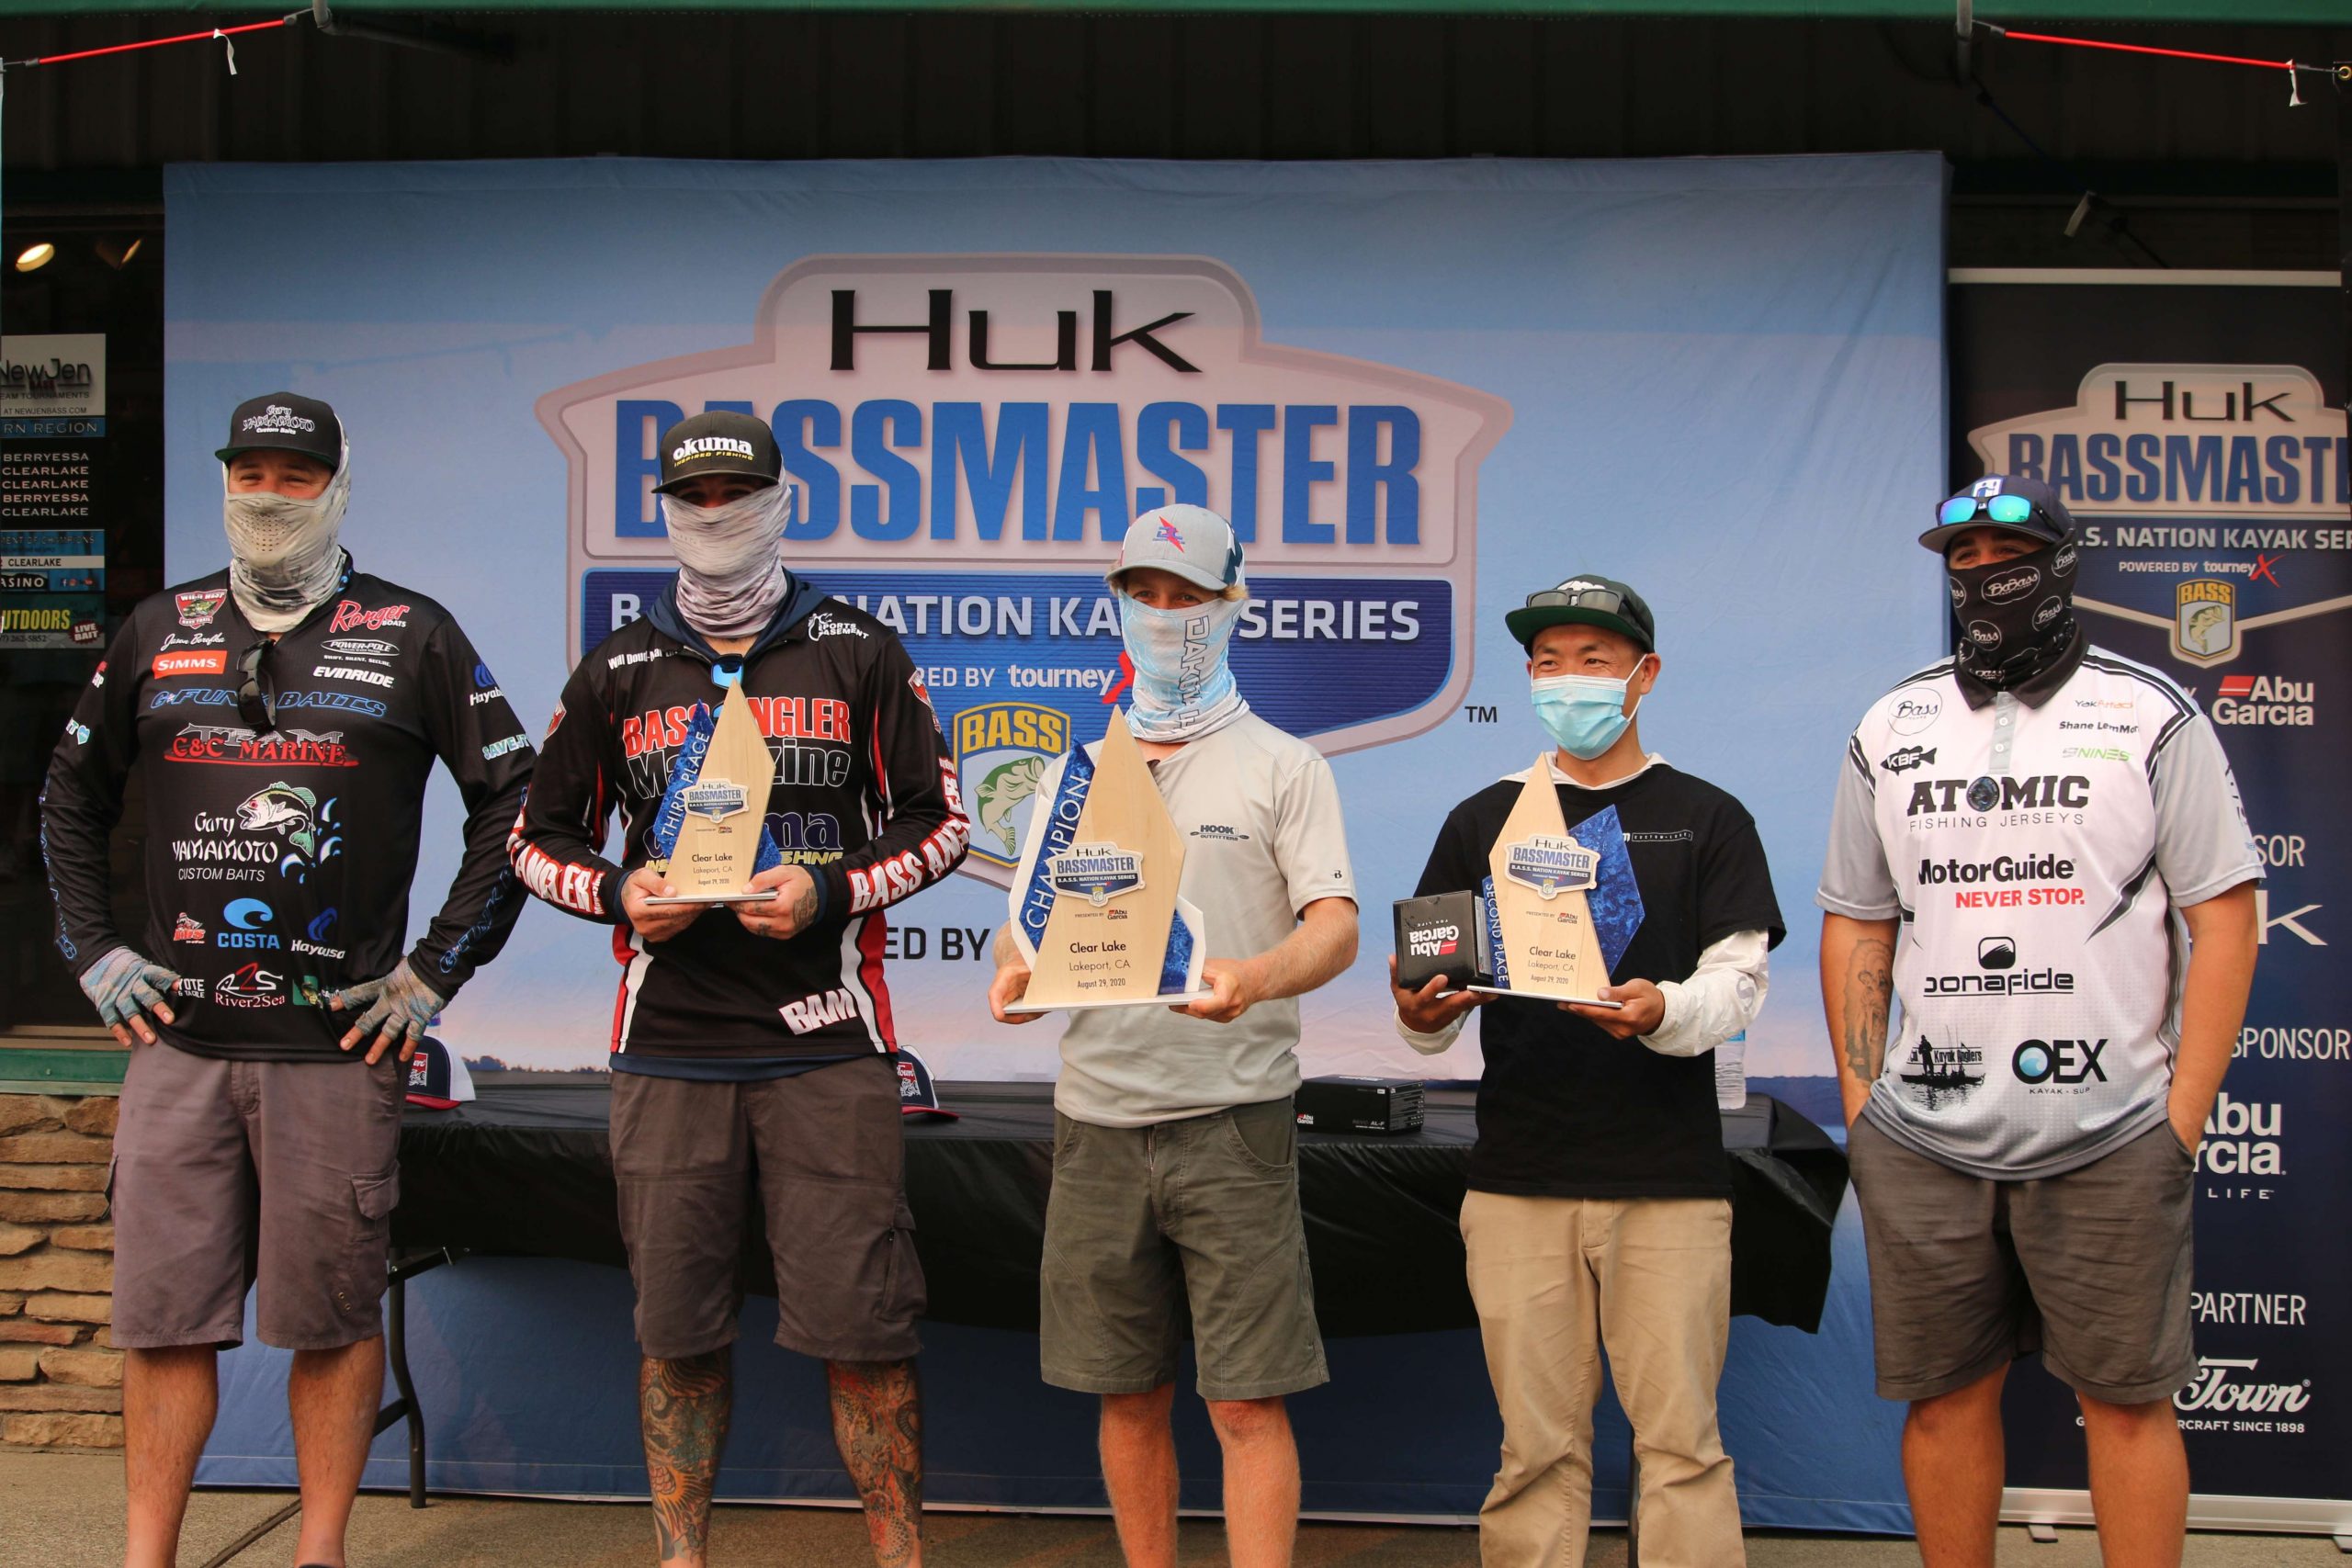 Here they are. Remember, in kayak tournaments it's still your five best fish, but instead of weight they are measured by inches. Anglers put their fish on a measuring board and send a picture to Tourney X and Bassmaster officials to judge and score. 